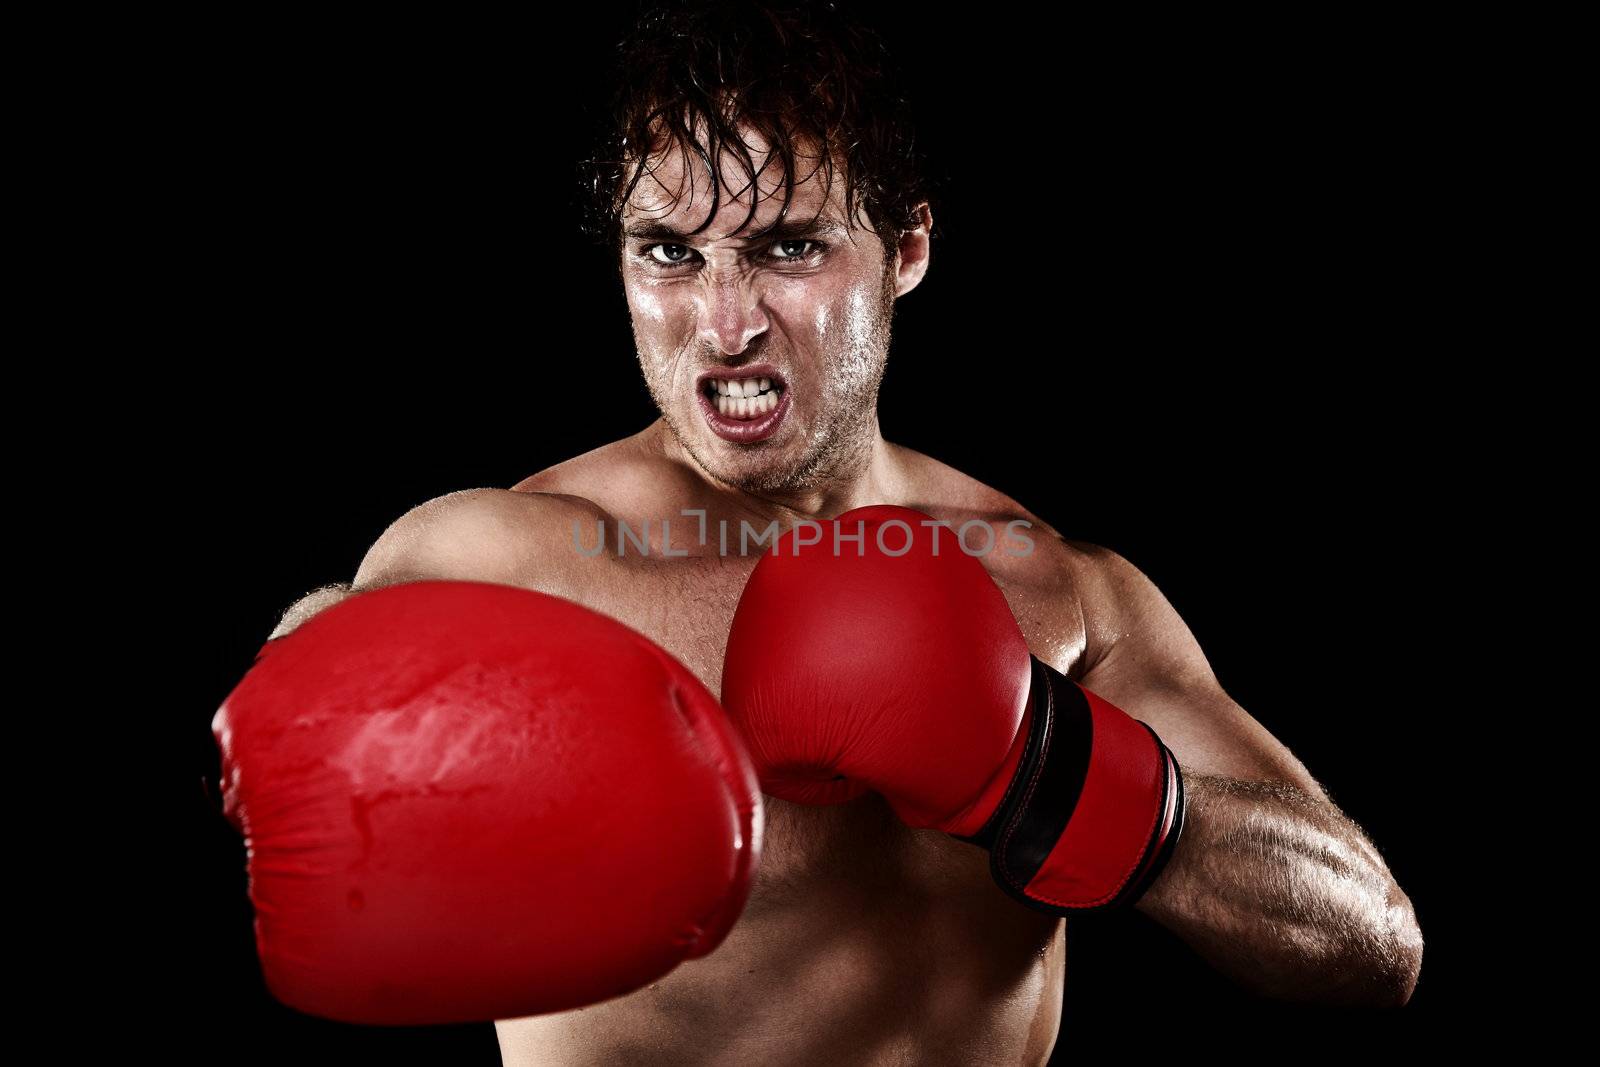 Boxing boxer. Man with boxing gloves hitting and punching looking angry. Strong muscular fit fitness model showing competition strength. Caucasian male model isolated on black background.